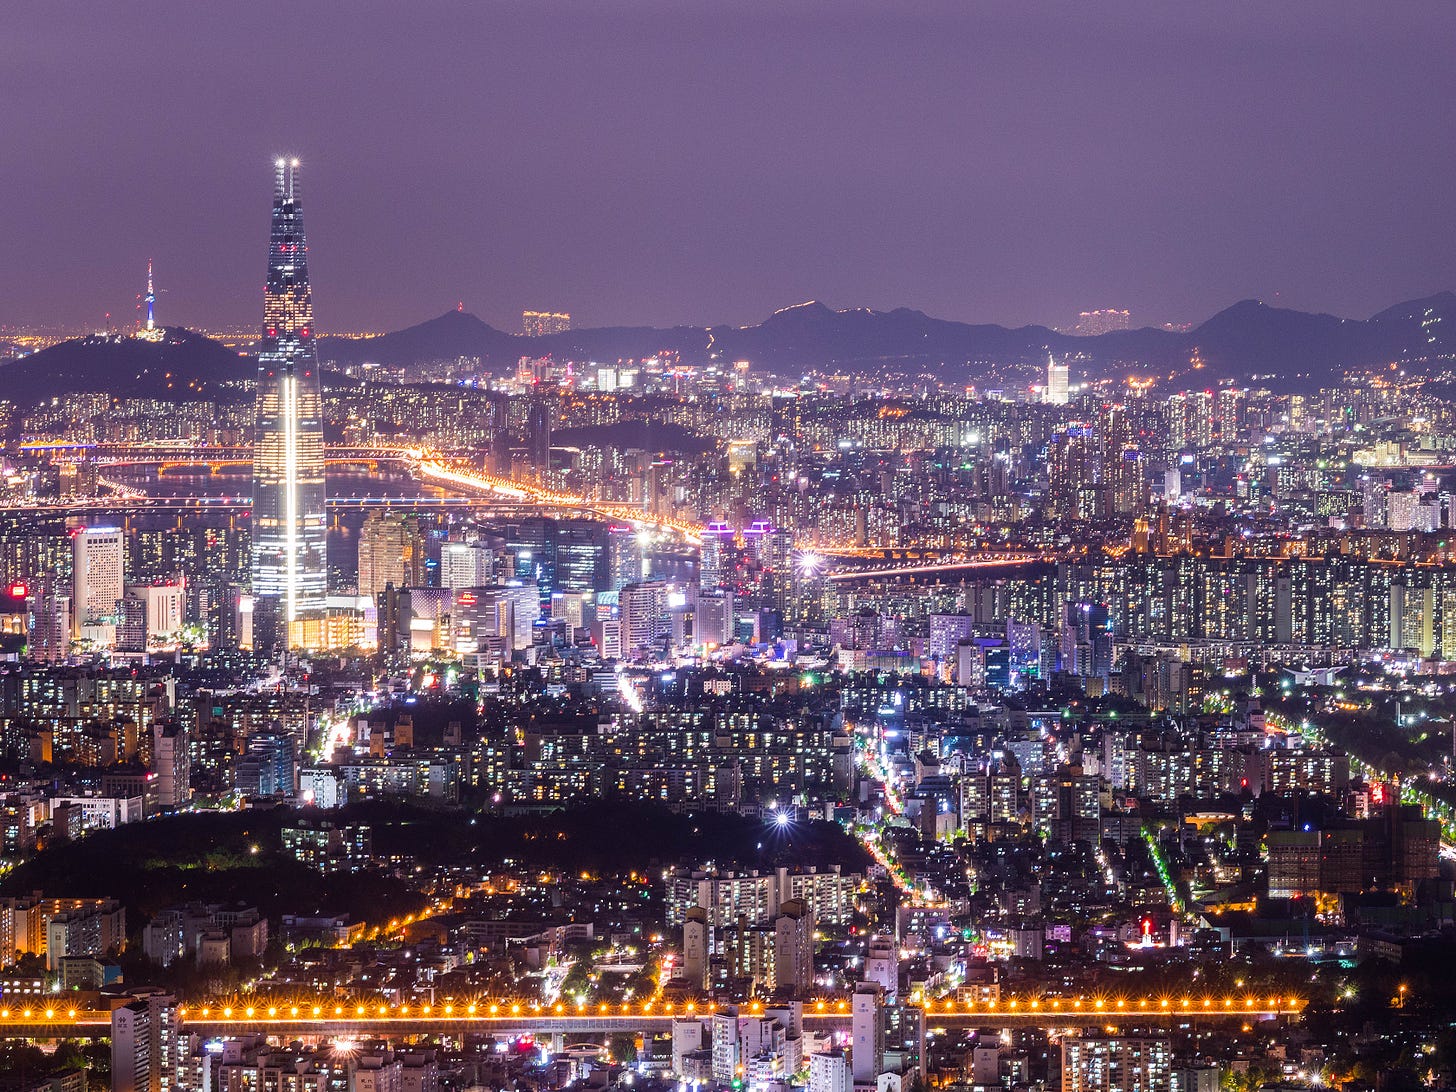 A photo of the Seoul skyline at night